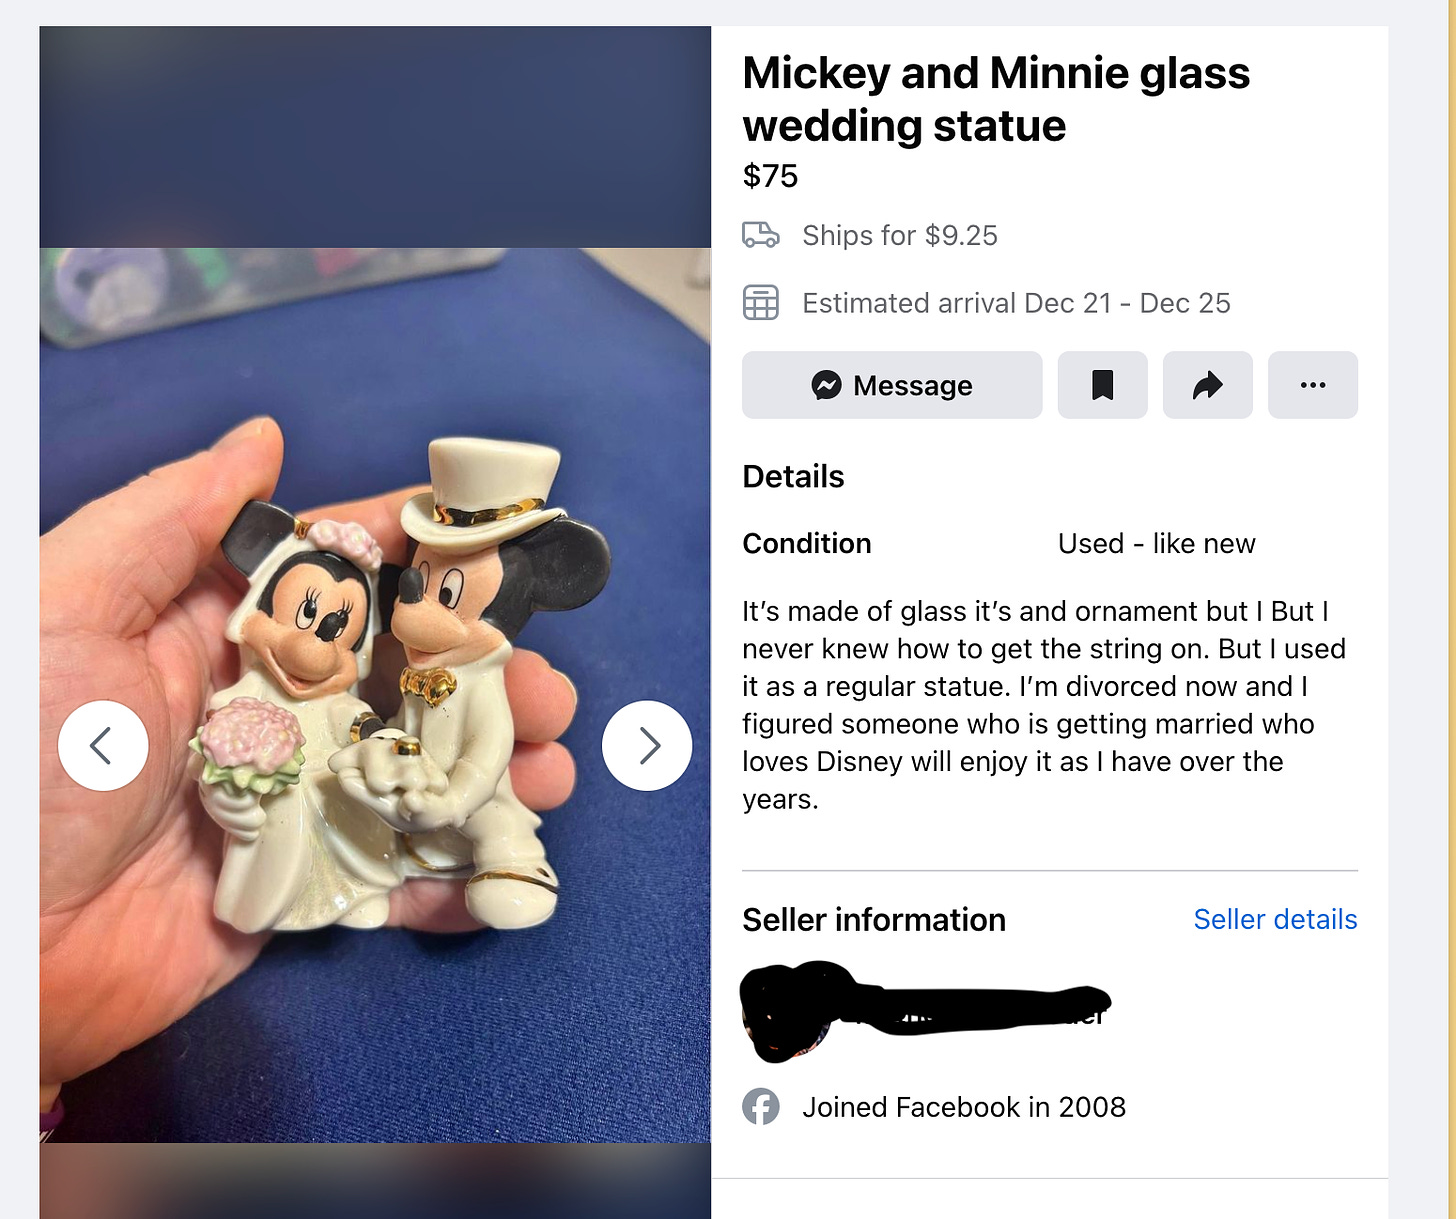 Facebook Marketplace listing for "Mickey and Minie wedding statue". description reads "i'm getting divorced now and I figured someone who is getting married who loves Disney will enjoy it.